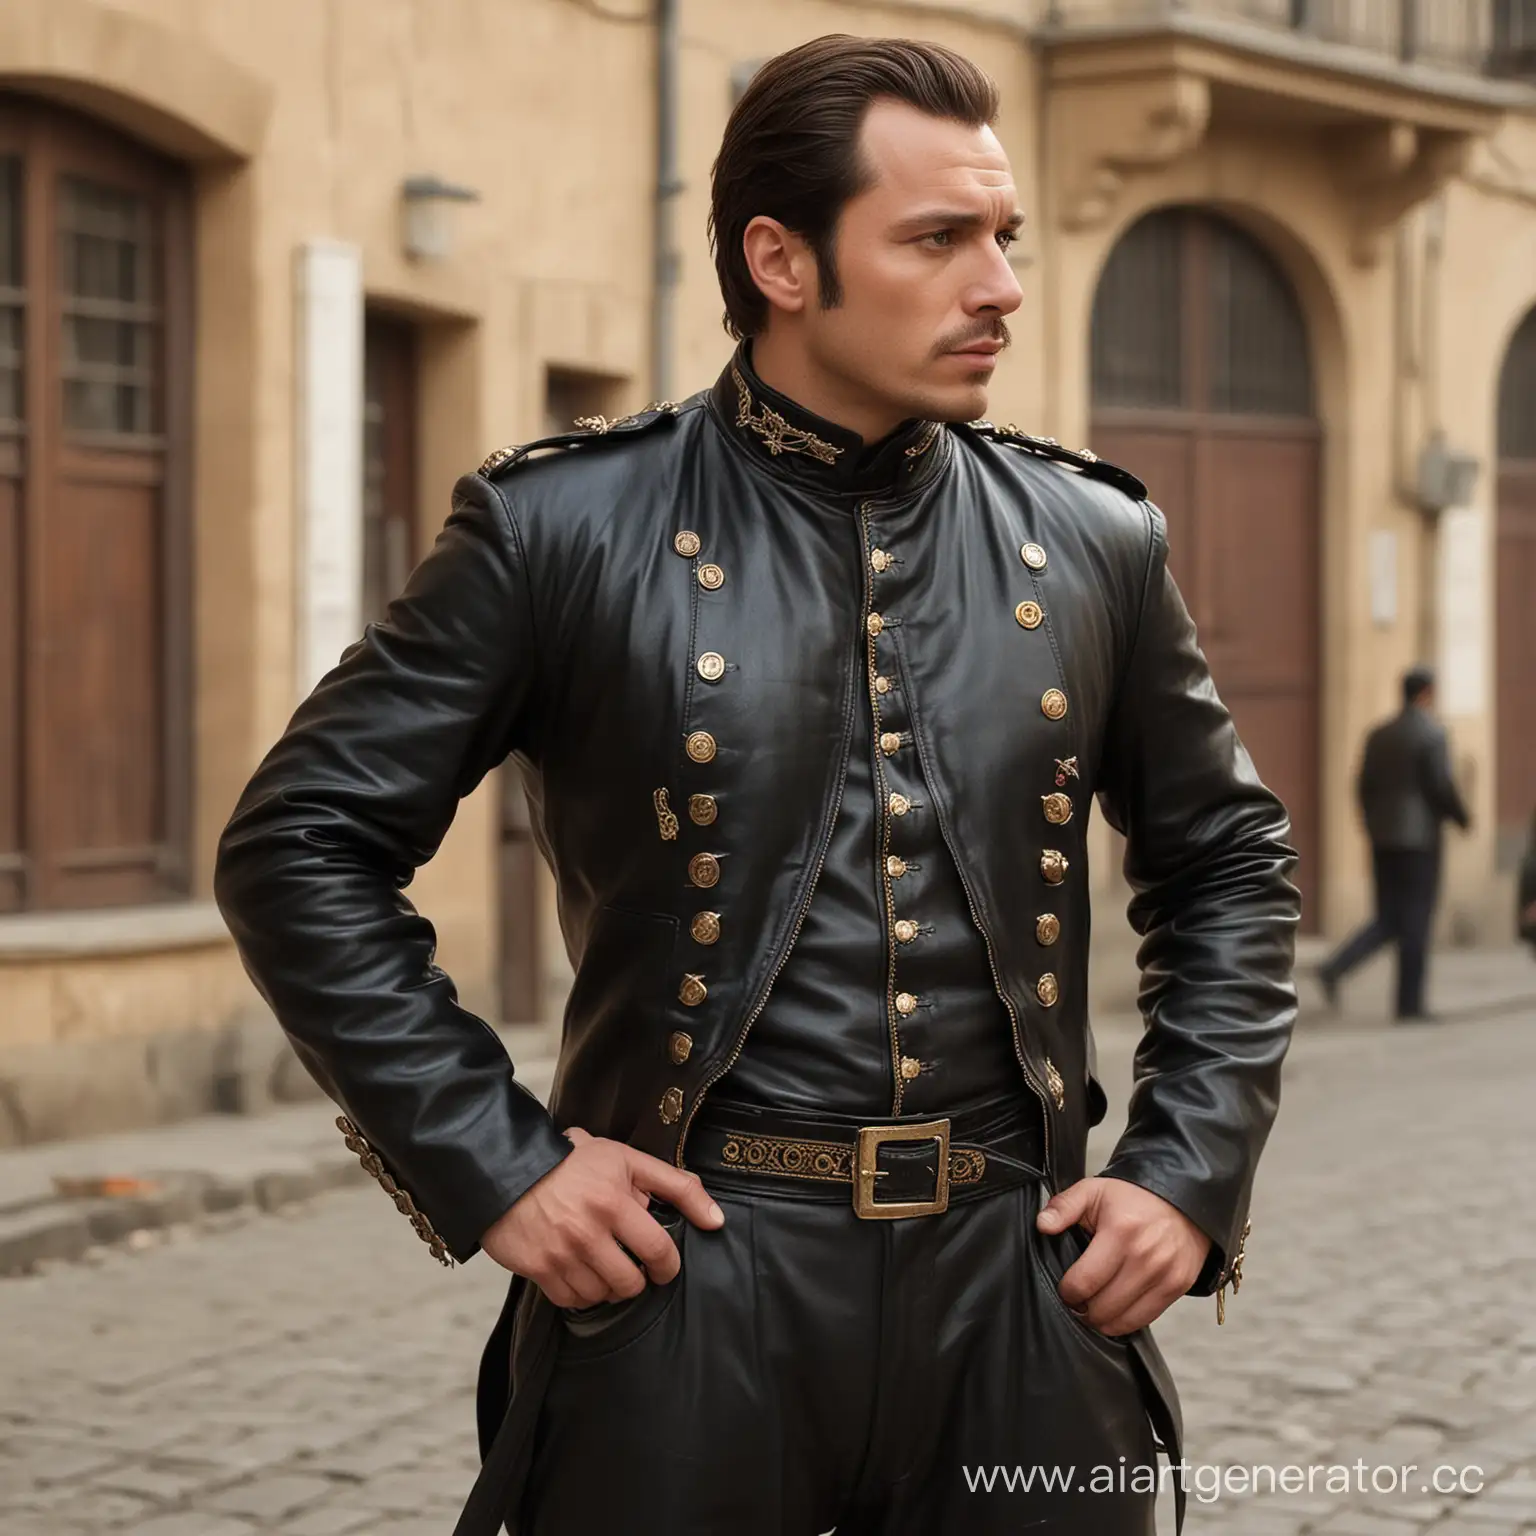 Stylish-Dwarf-in-Black-Leather-Jacket-and-Galife-Trousers